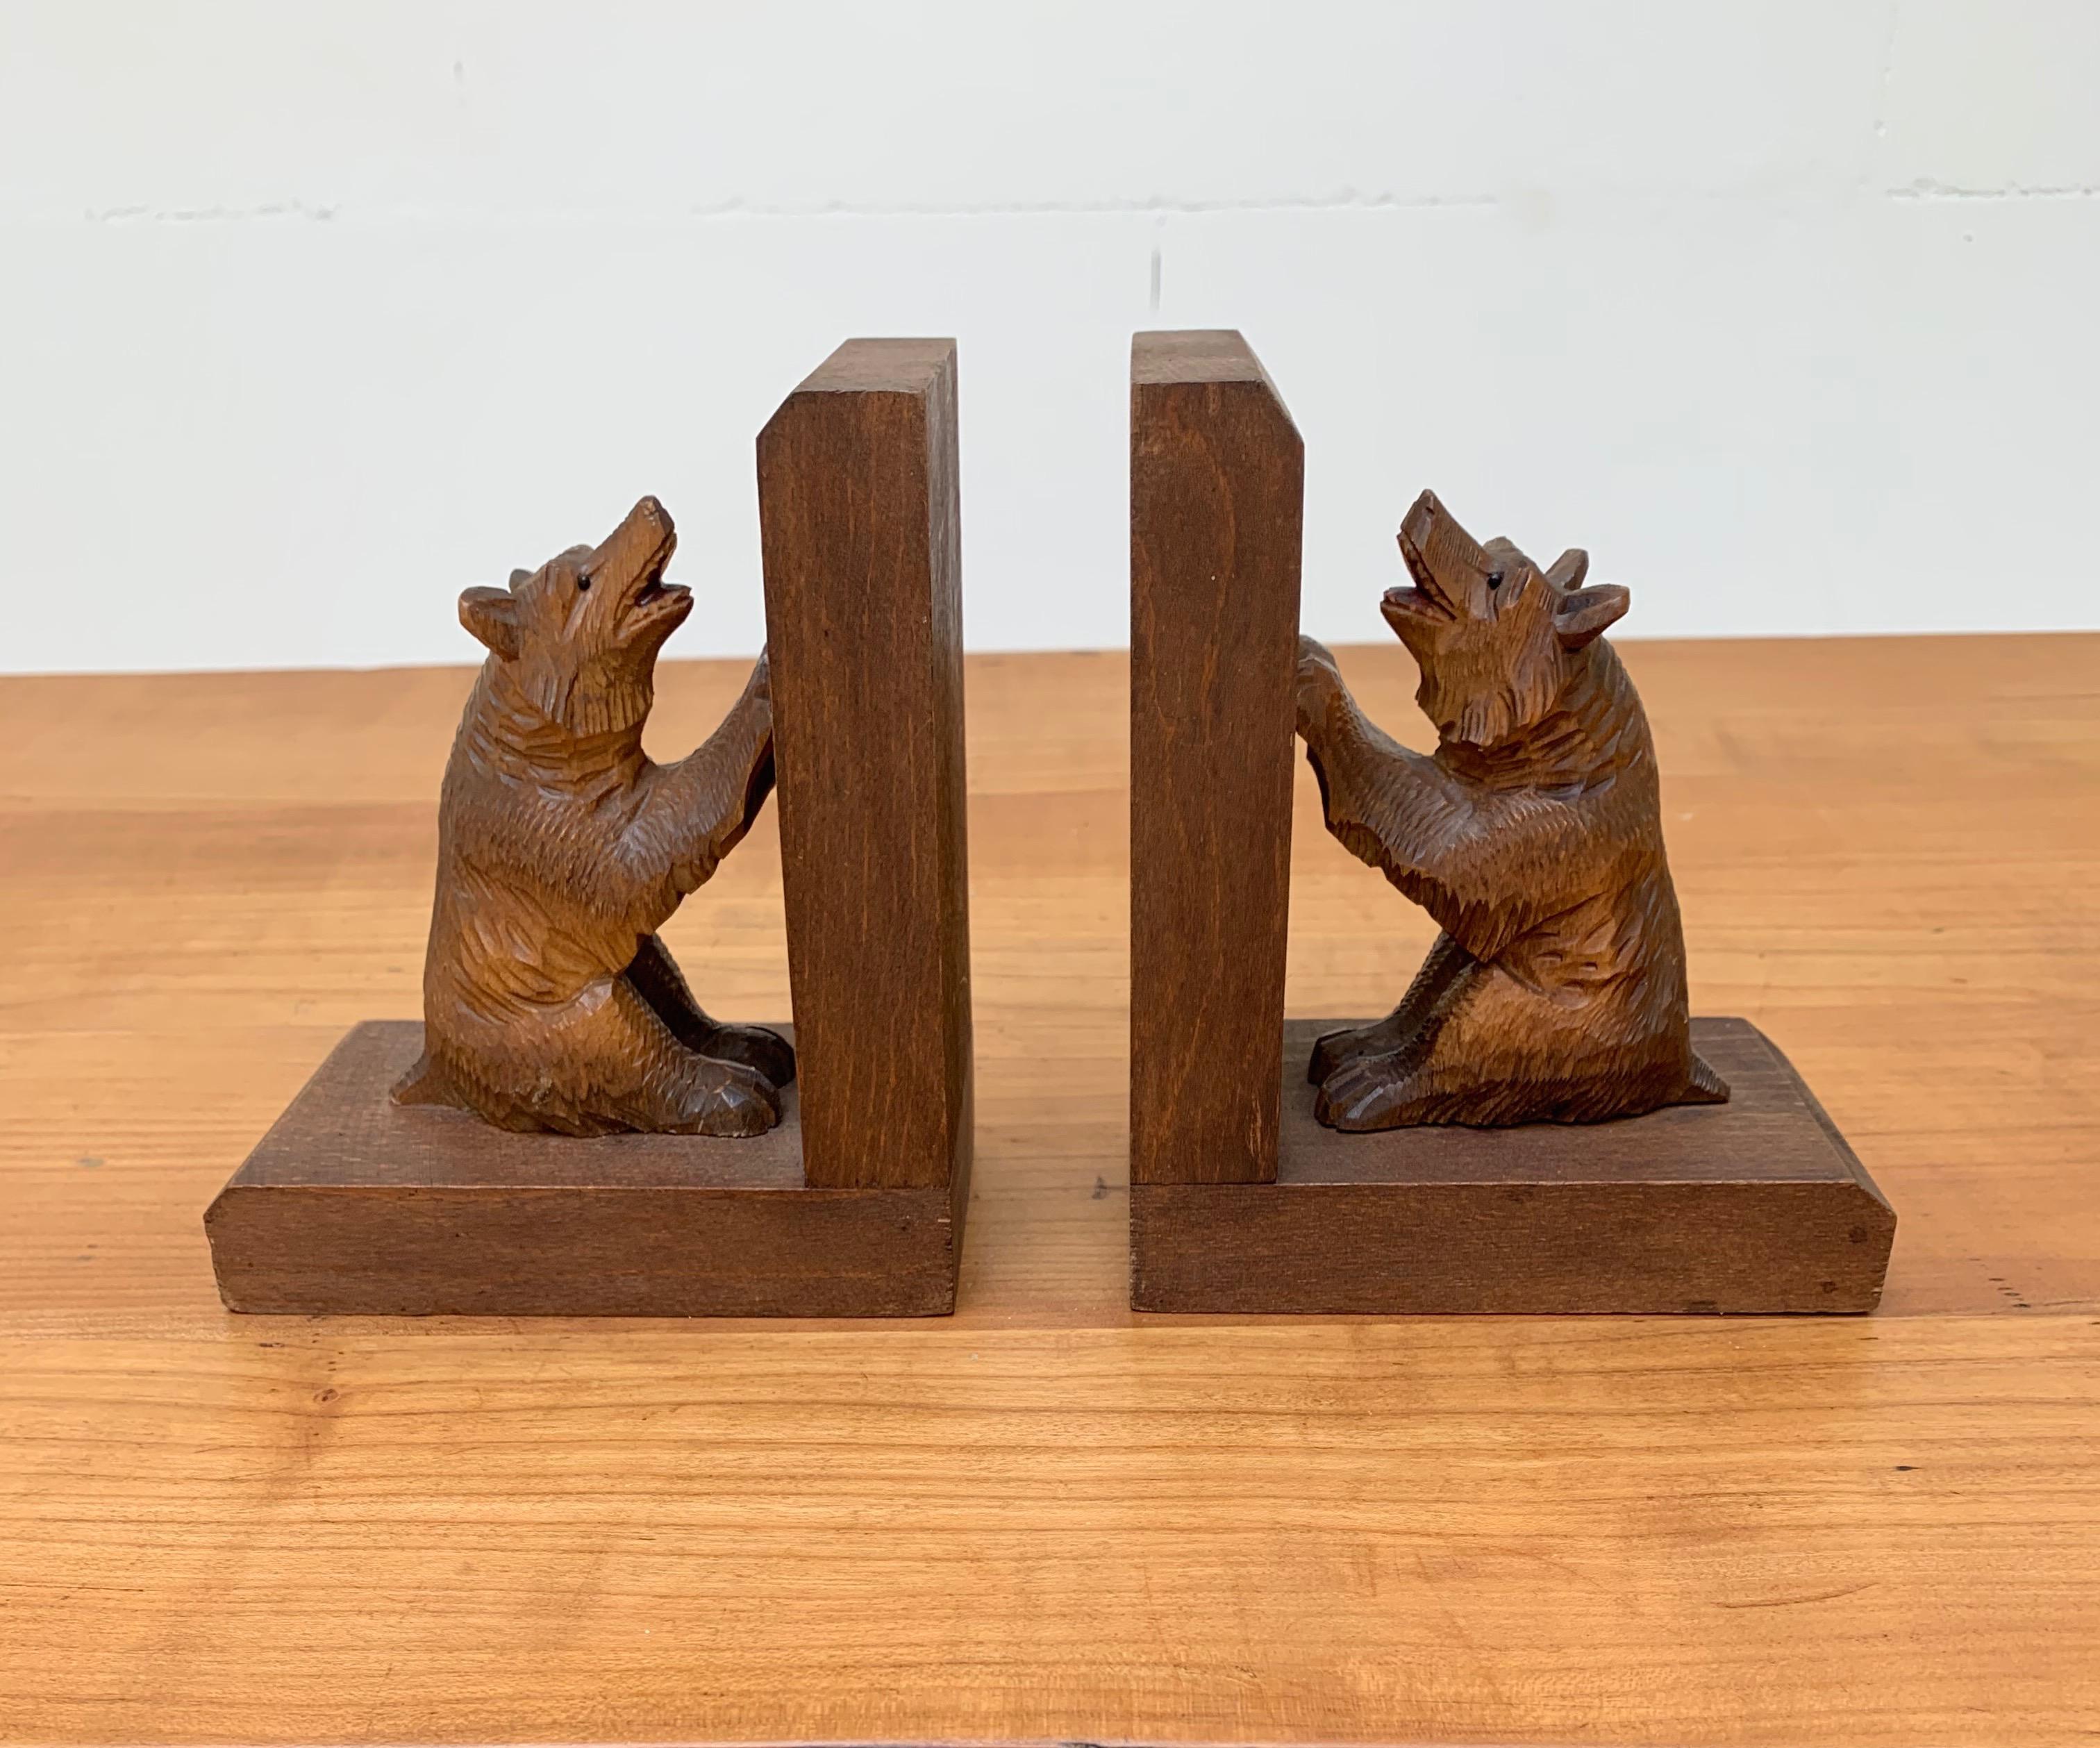 Small, but coolest pair of bear bookends.

Thanks to the wonderful bears, these hand-carved bookends from the 1930s are an absolute joy to own and look. These sculptural bookends have a warm and wonderful patina and the bears even come with their